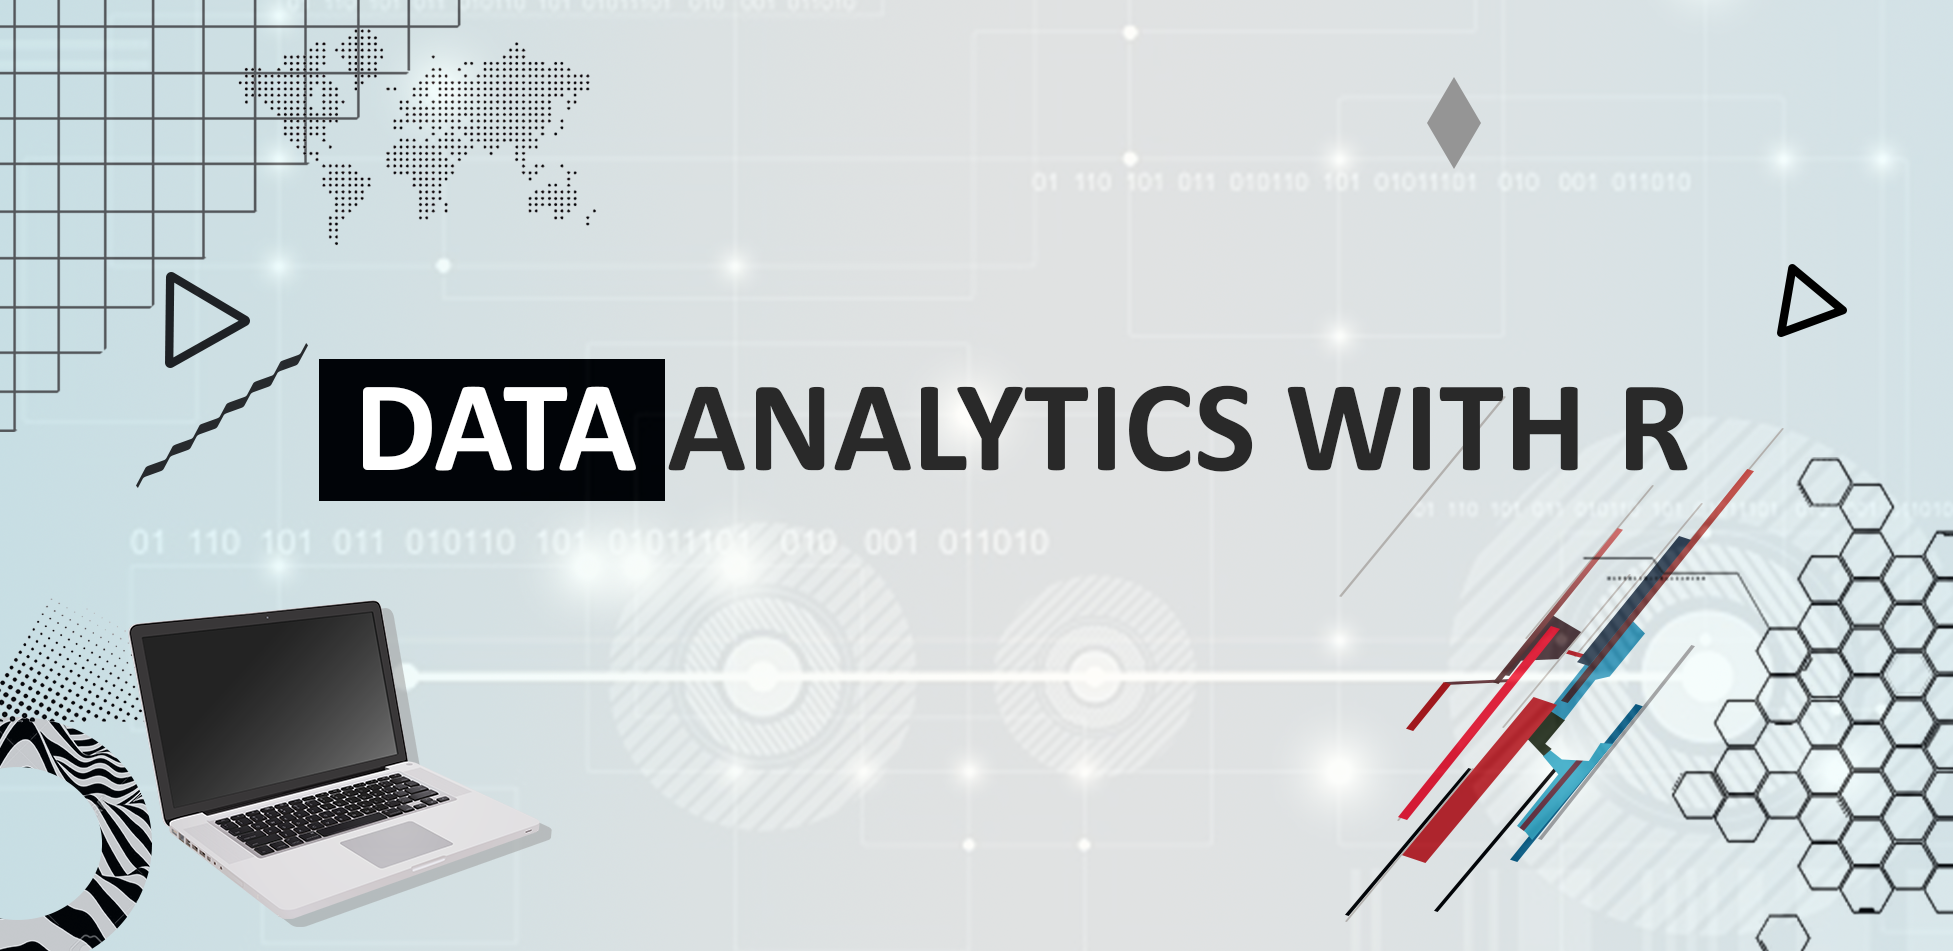 DATA-ANALYTICS-WITH-R-HOME-BANNER